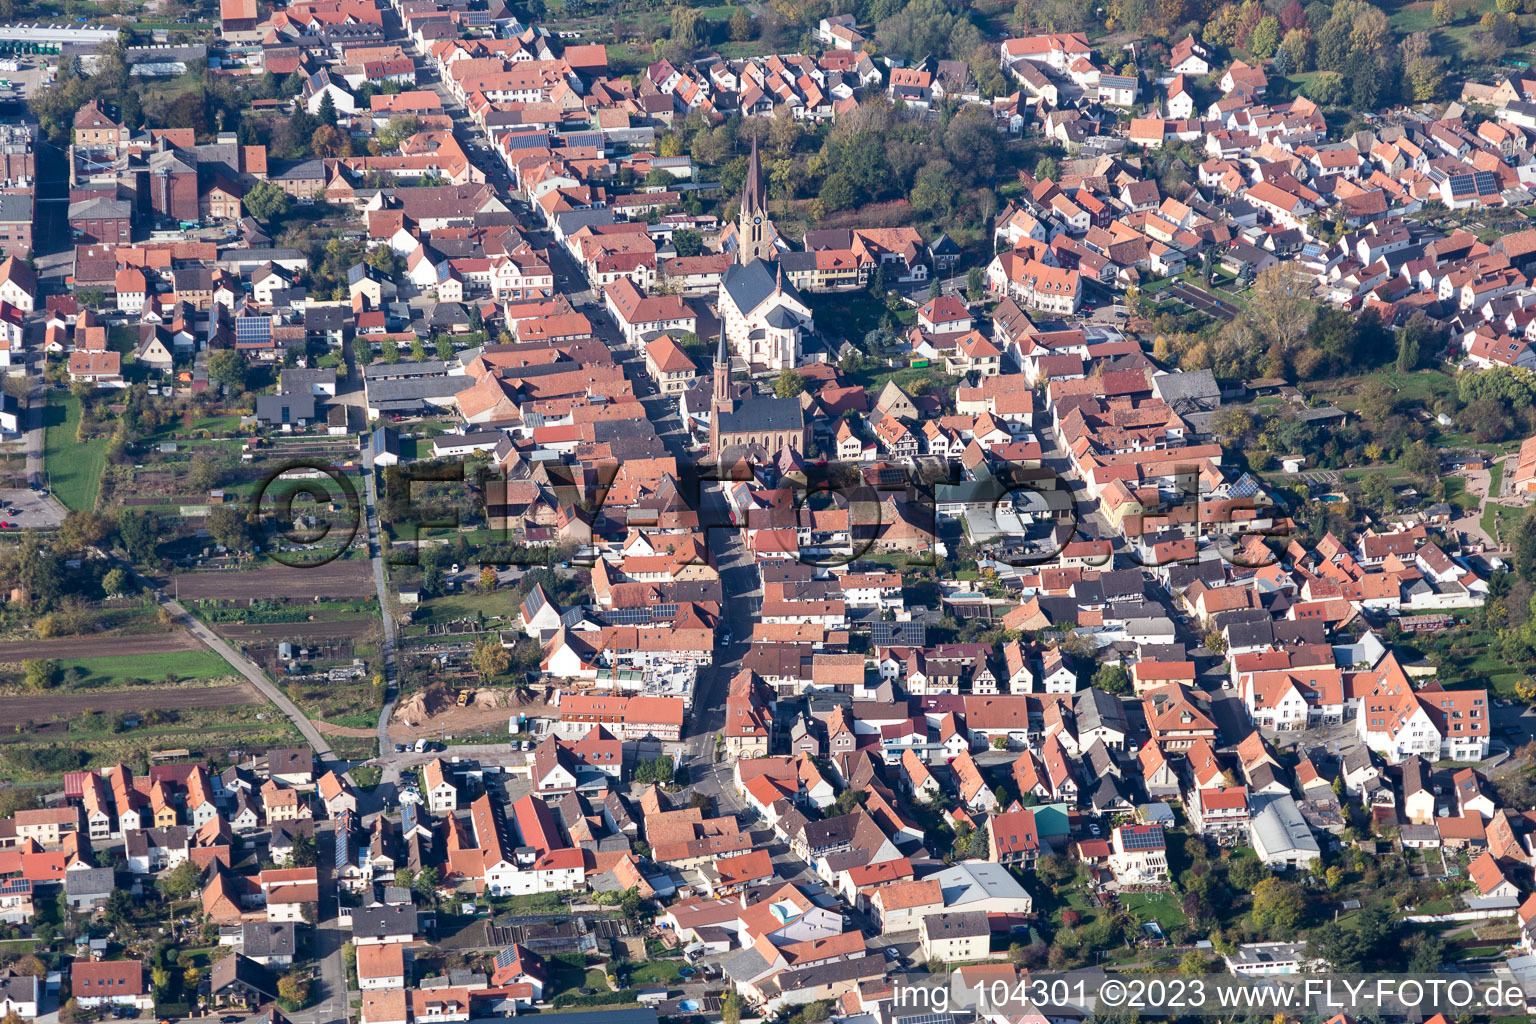 Bellheim in the state Rhineland-Palatinate, Germany seen from above